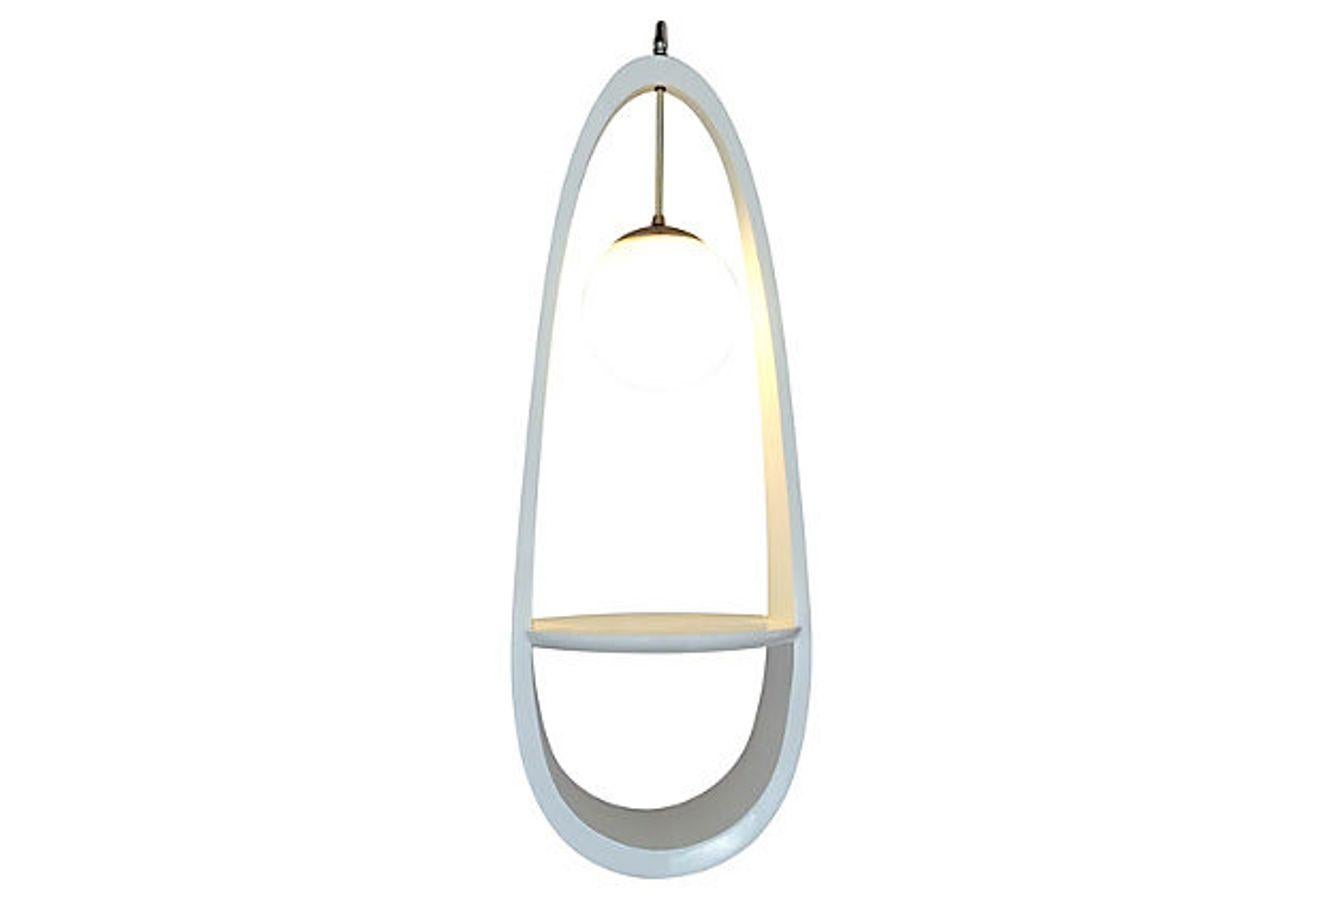 1970s MOD wood & chrome hanging pendant light. This unique and coveted freshly painted the original bright white lacquer wood pendant light is teardrop and curved in shape with a built in 